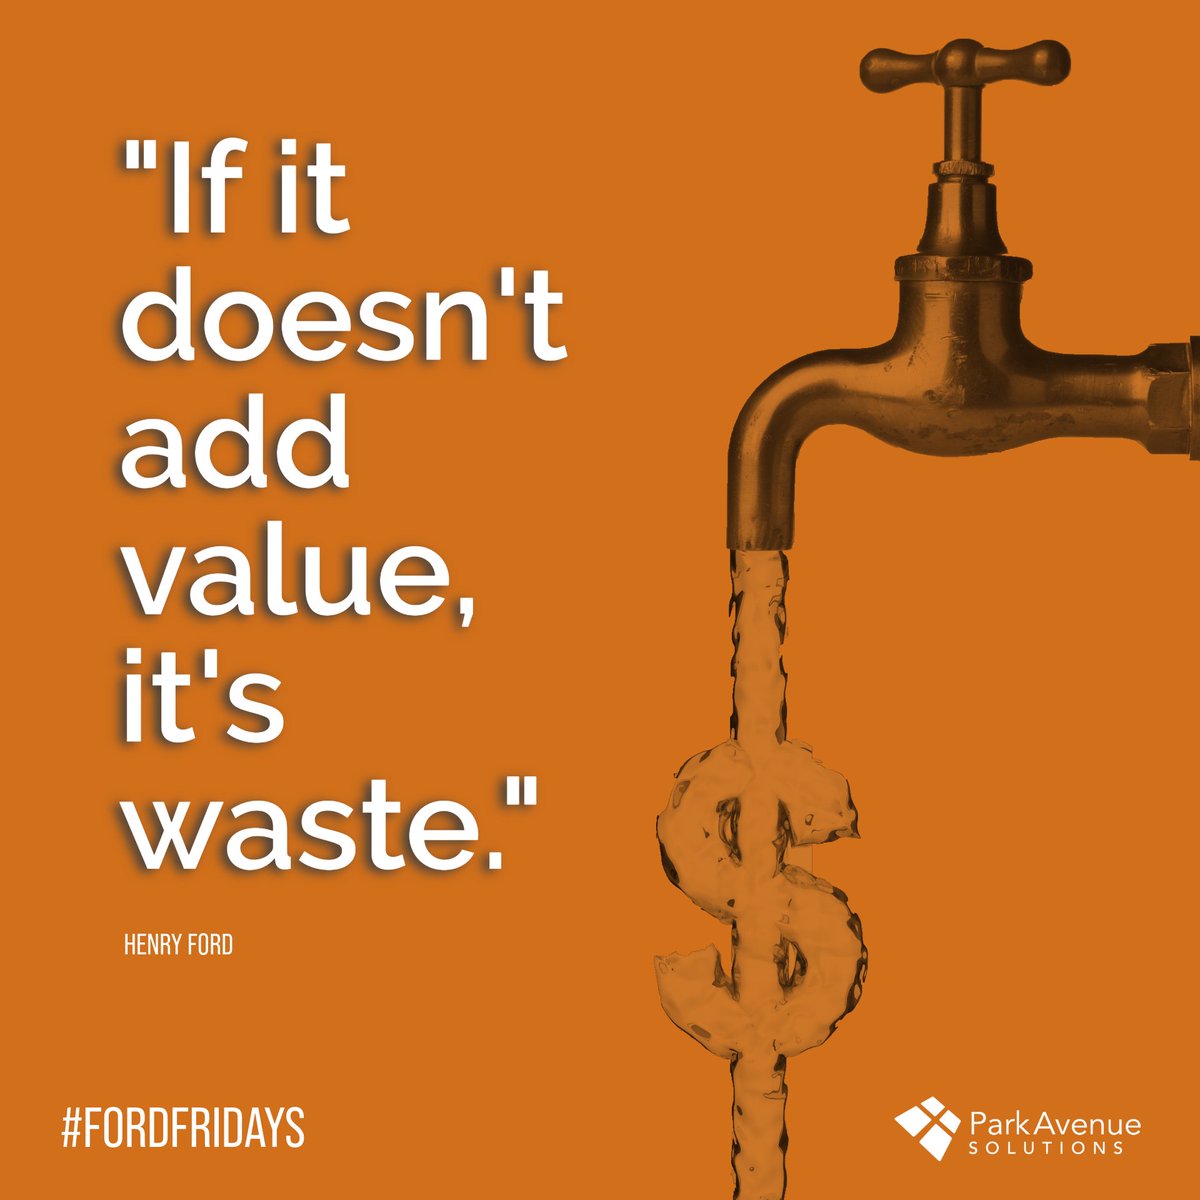 'If it doesn't add value, it's waste.' ~Henry Ford

#FordFriday #FordFridays #HenryFord #WasteInTheWild #WasteNot #ContinuousImprovement #ProcessImprovement #OpEx #OperationalExcellence #Quality #8Wastes #Lean #LeanSixSigma #MotivationalQuotes #Quotes #FridayMotivation